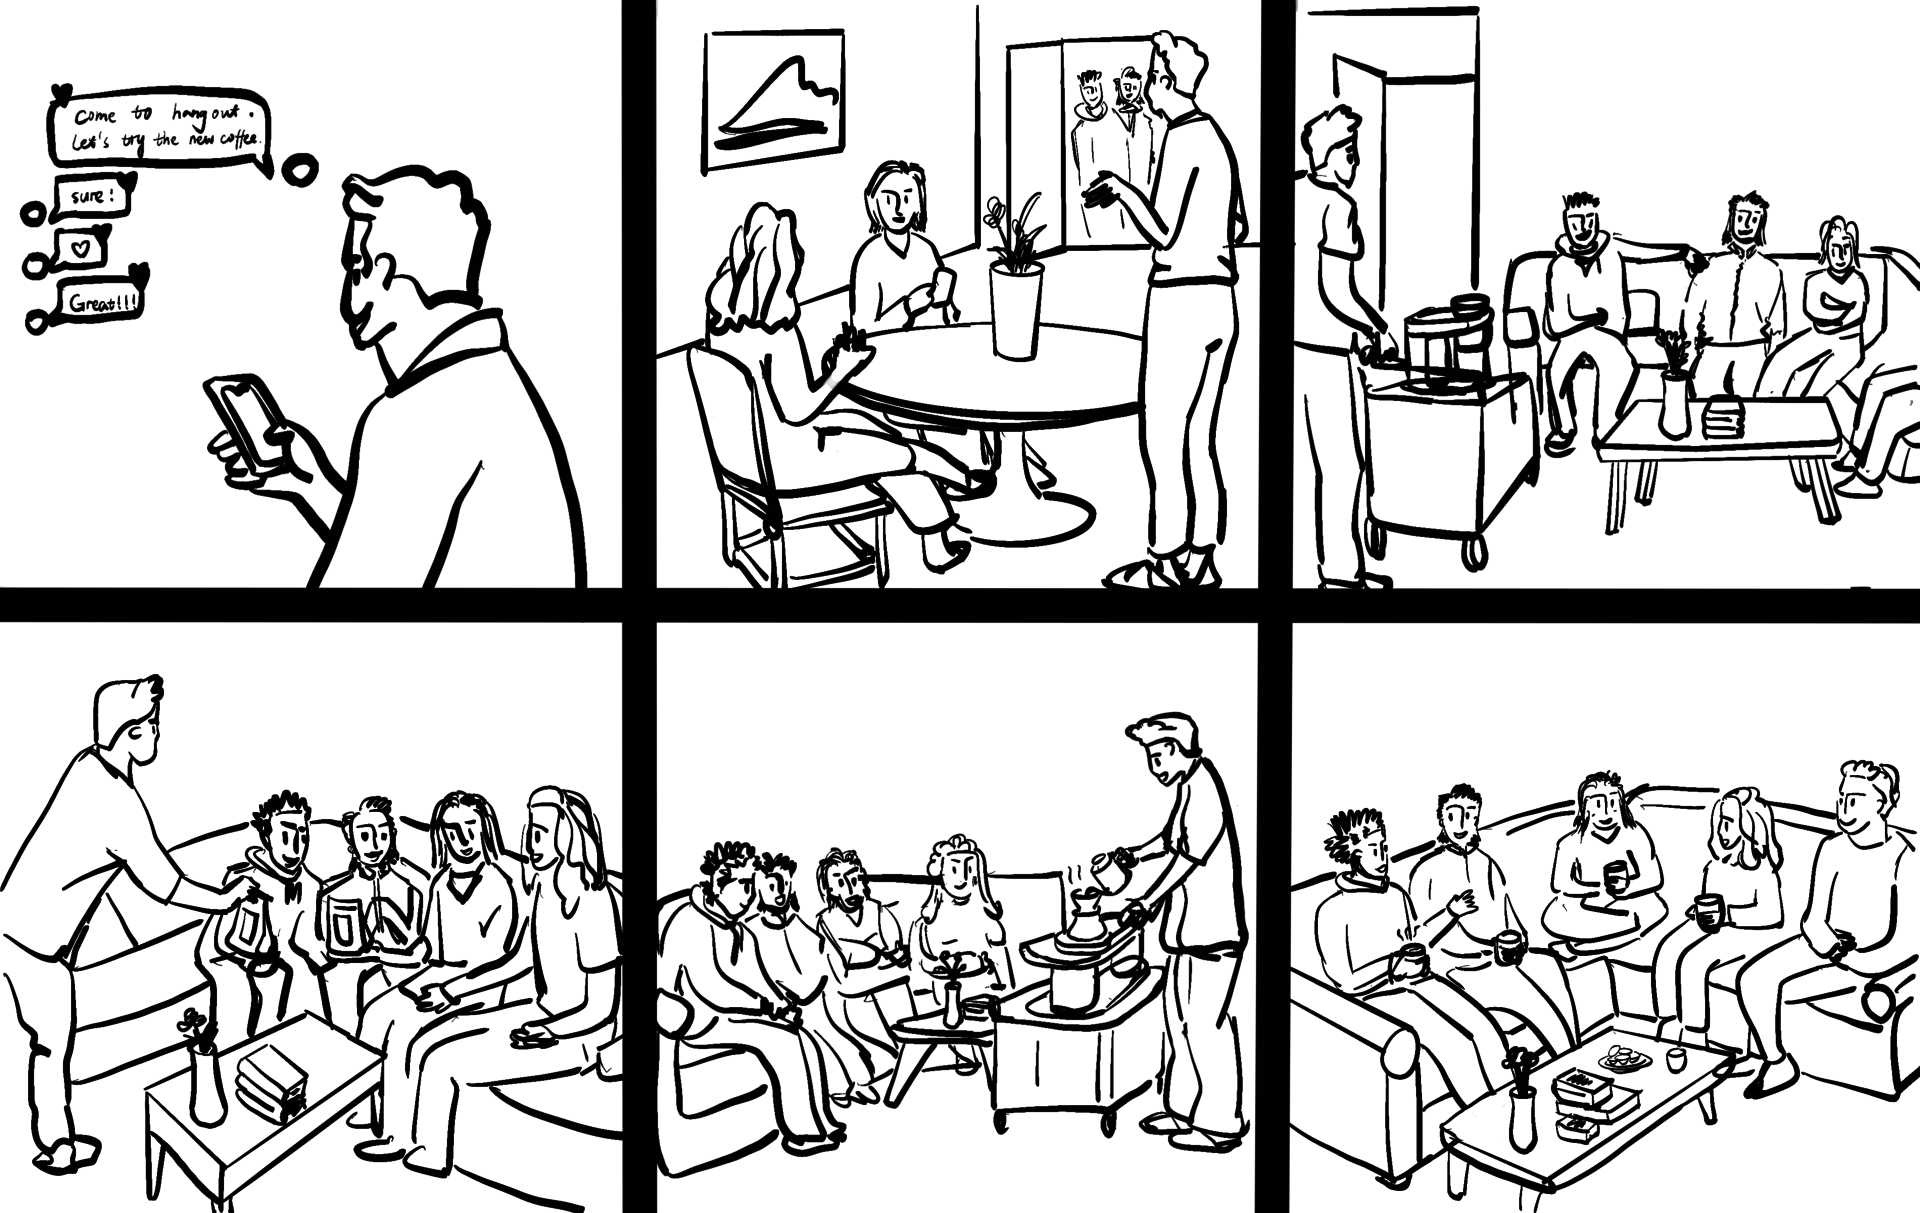 Comic strip depicting the UX of the CoffeeHouse.